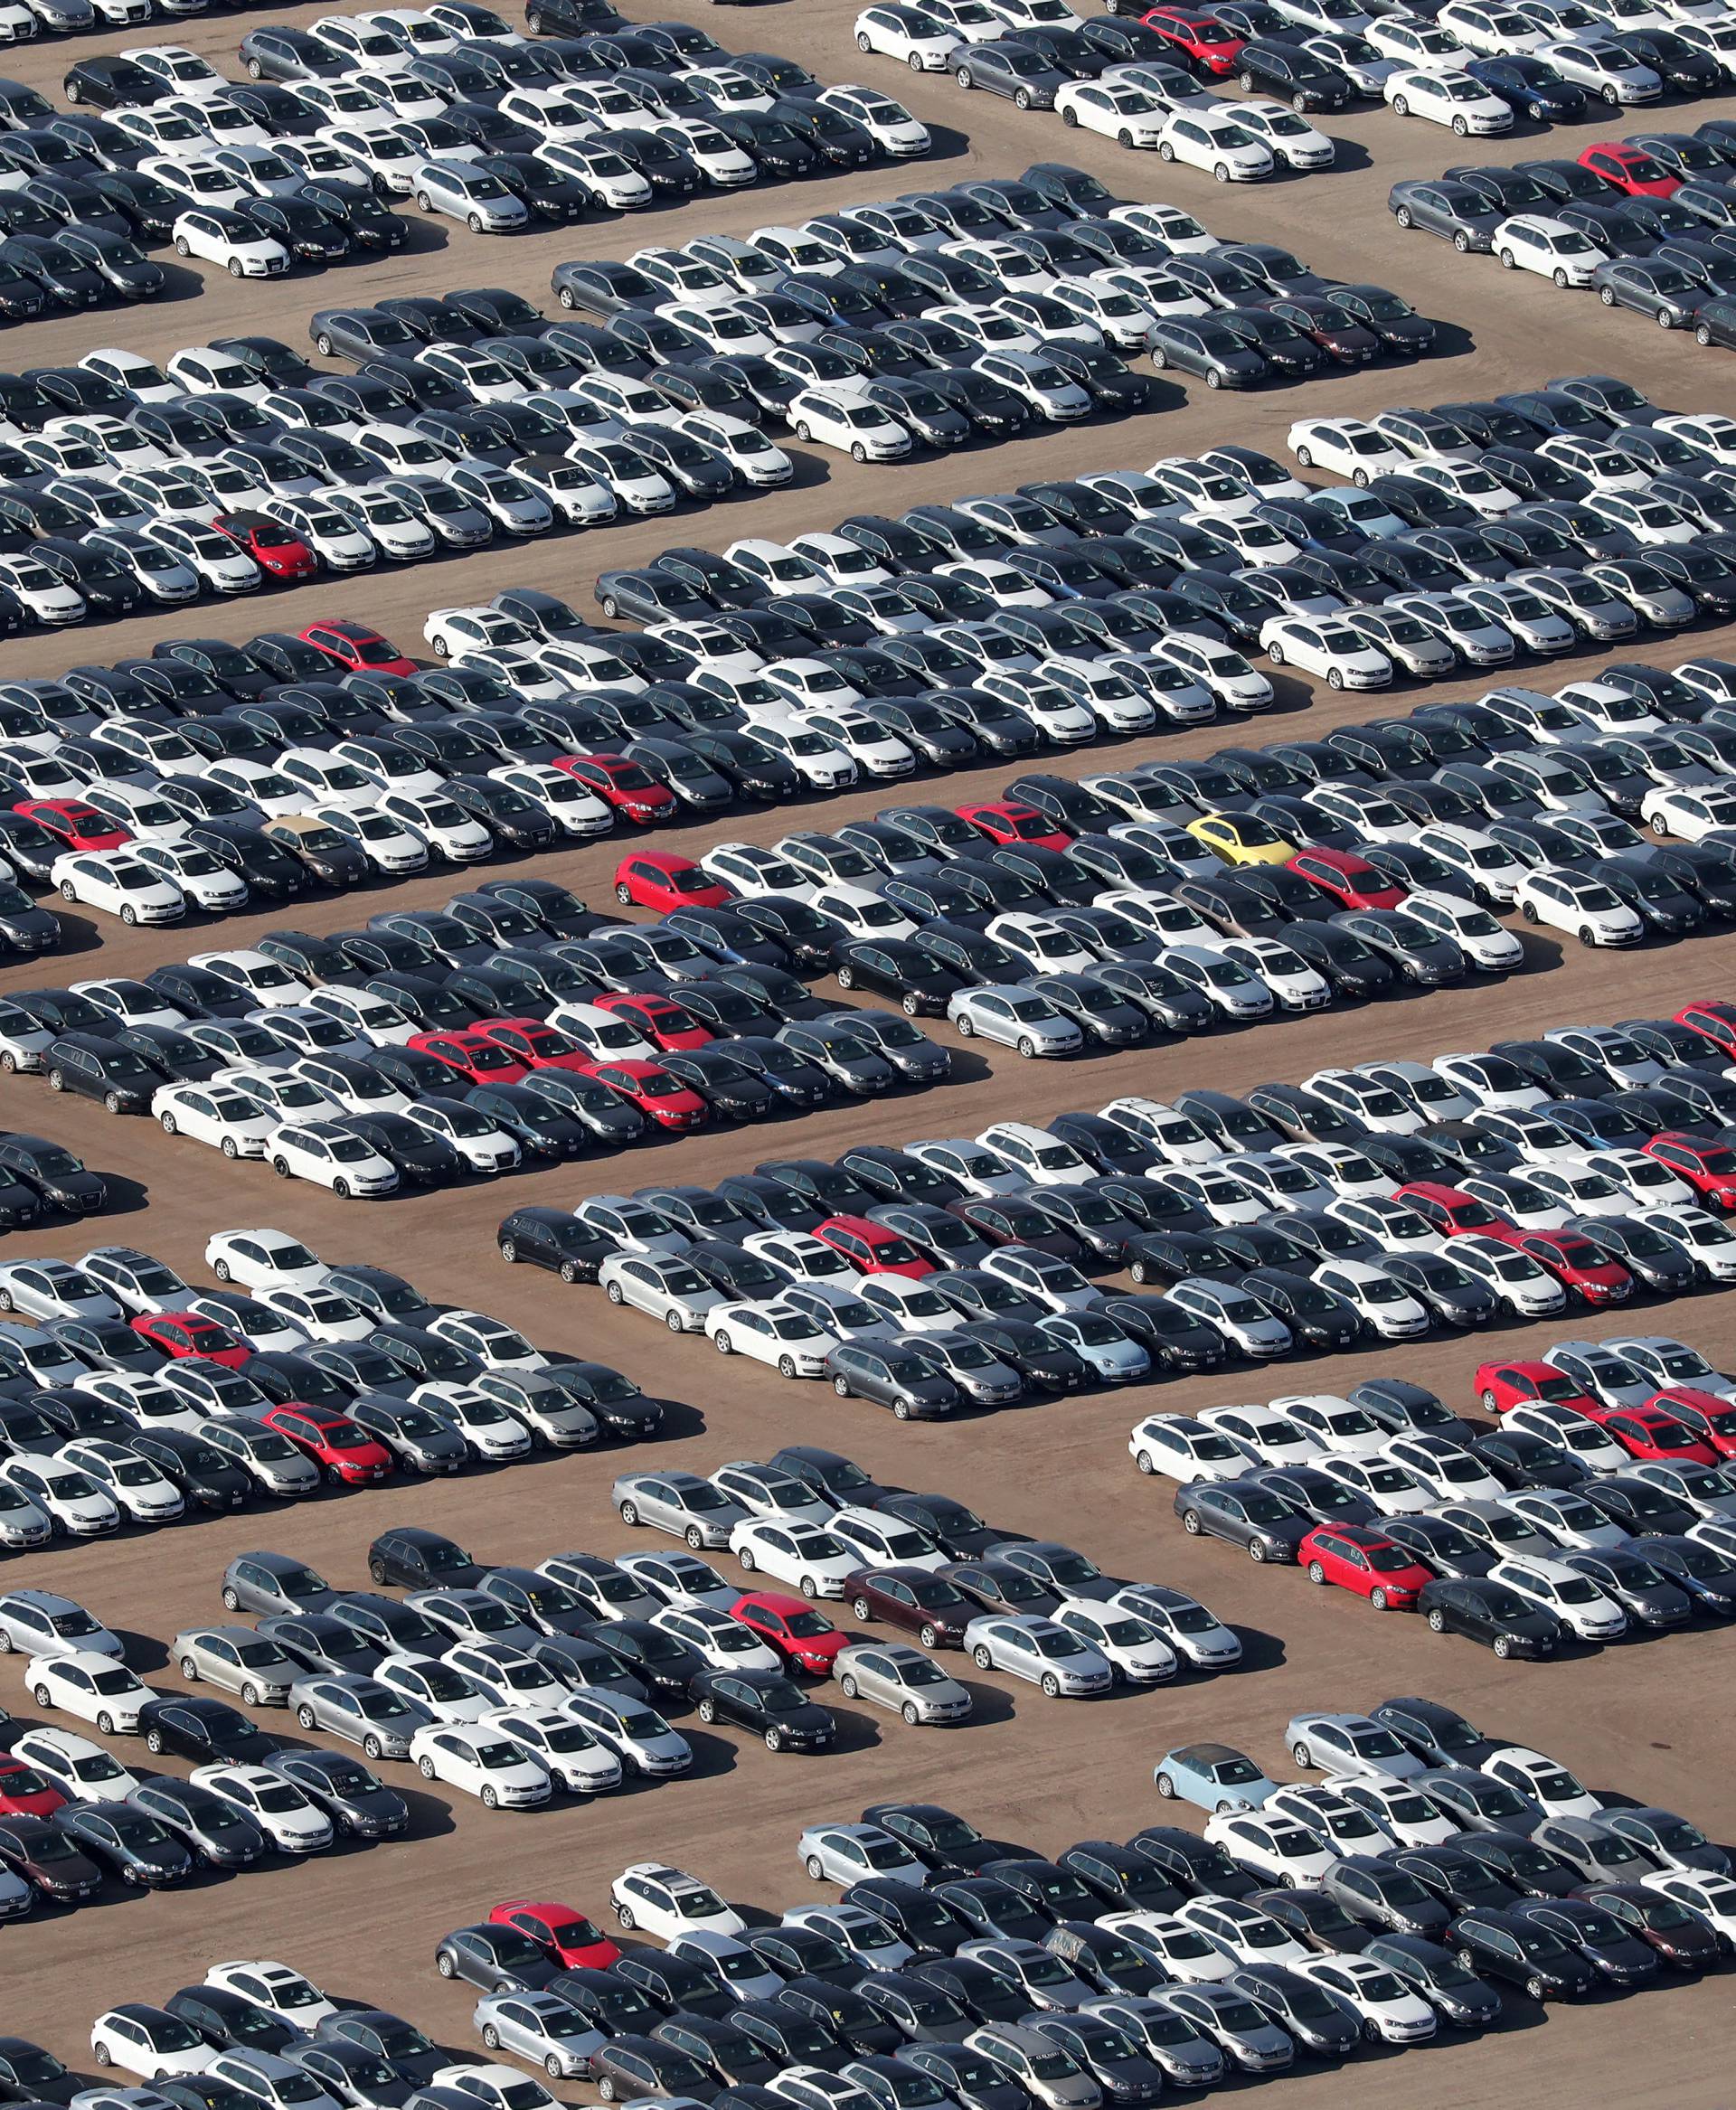 FILE PHOTO: Reacquired Volkswagen and Audi diesel cars sit in a desert graveyard near Victorville